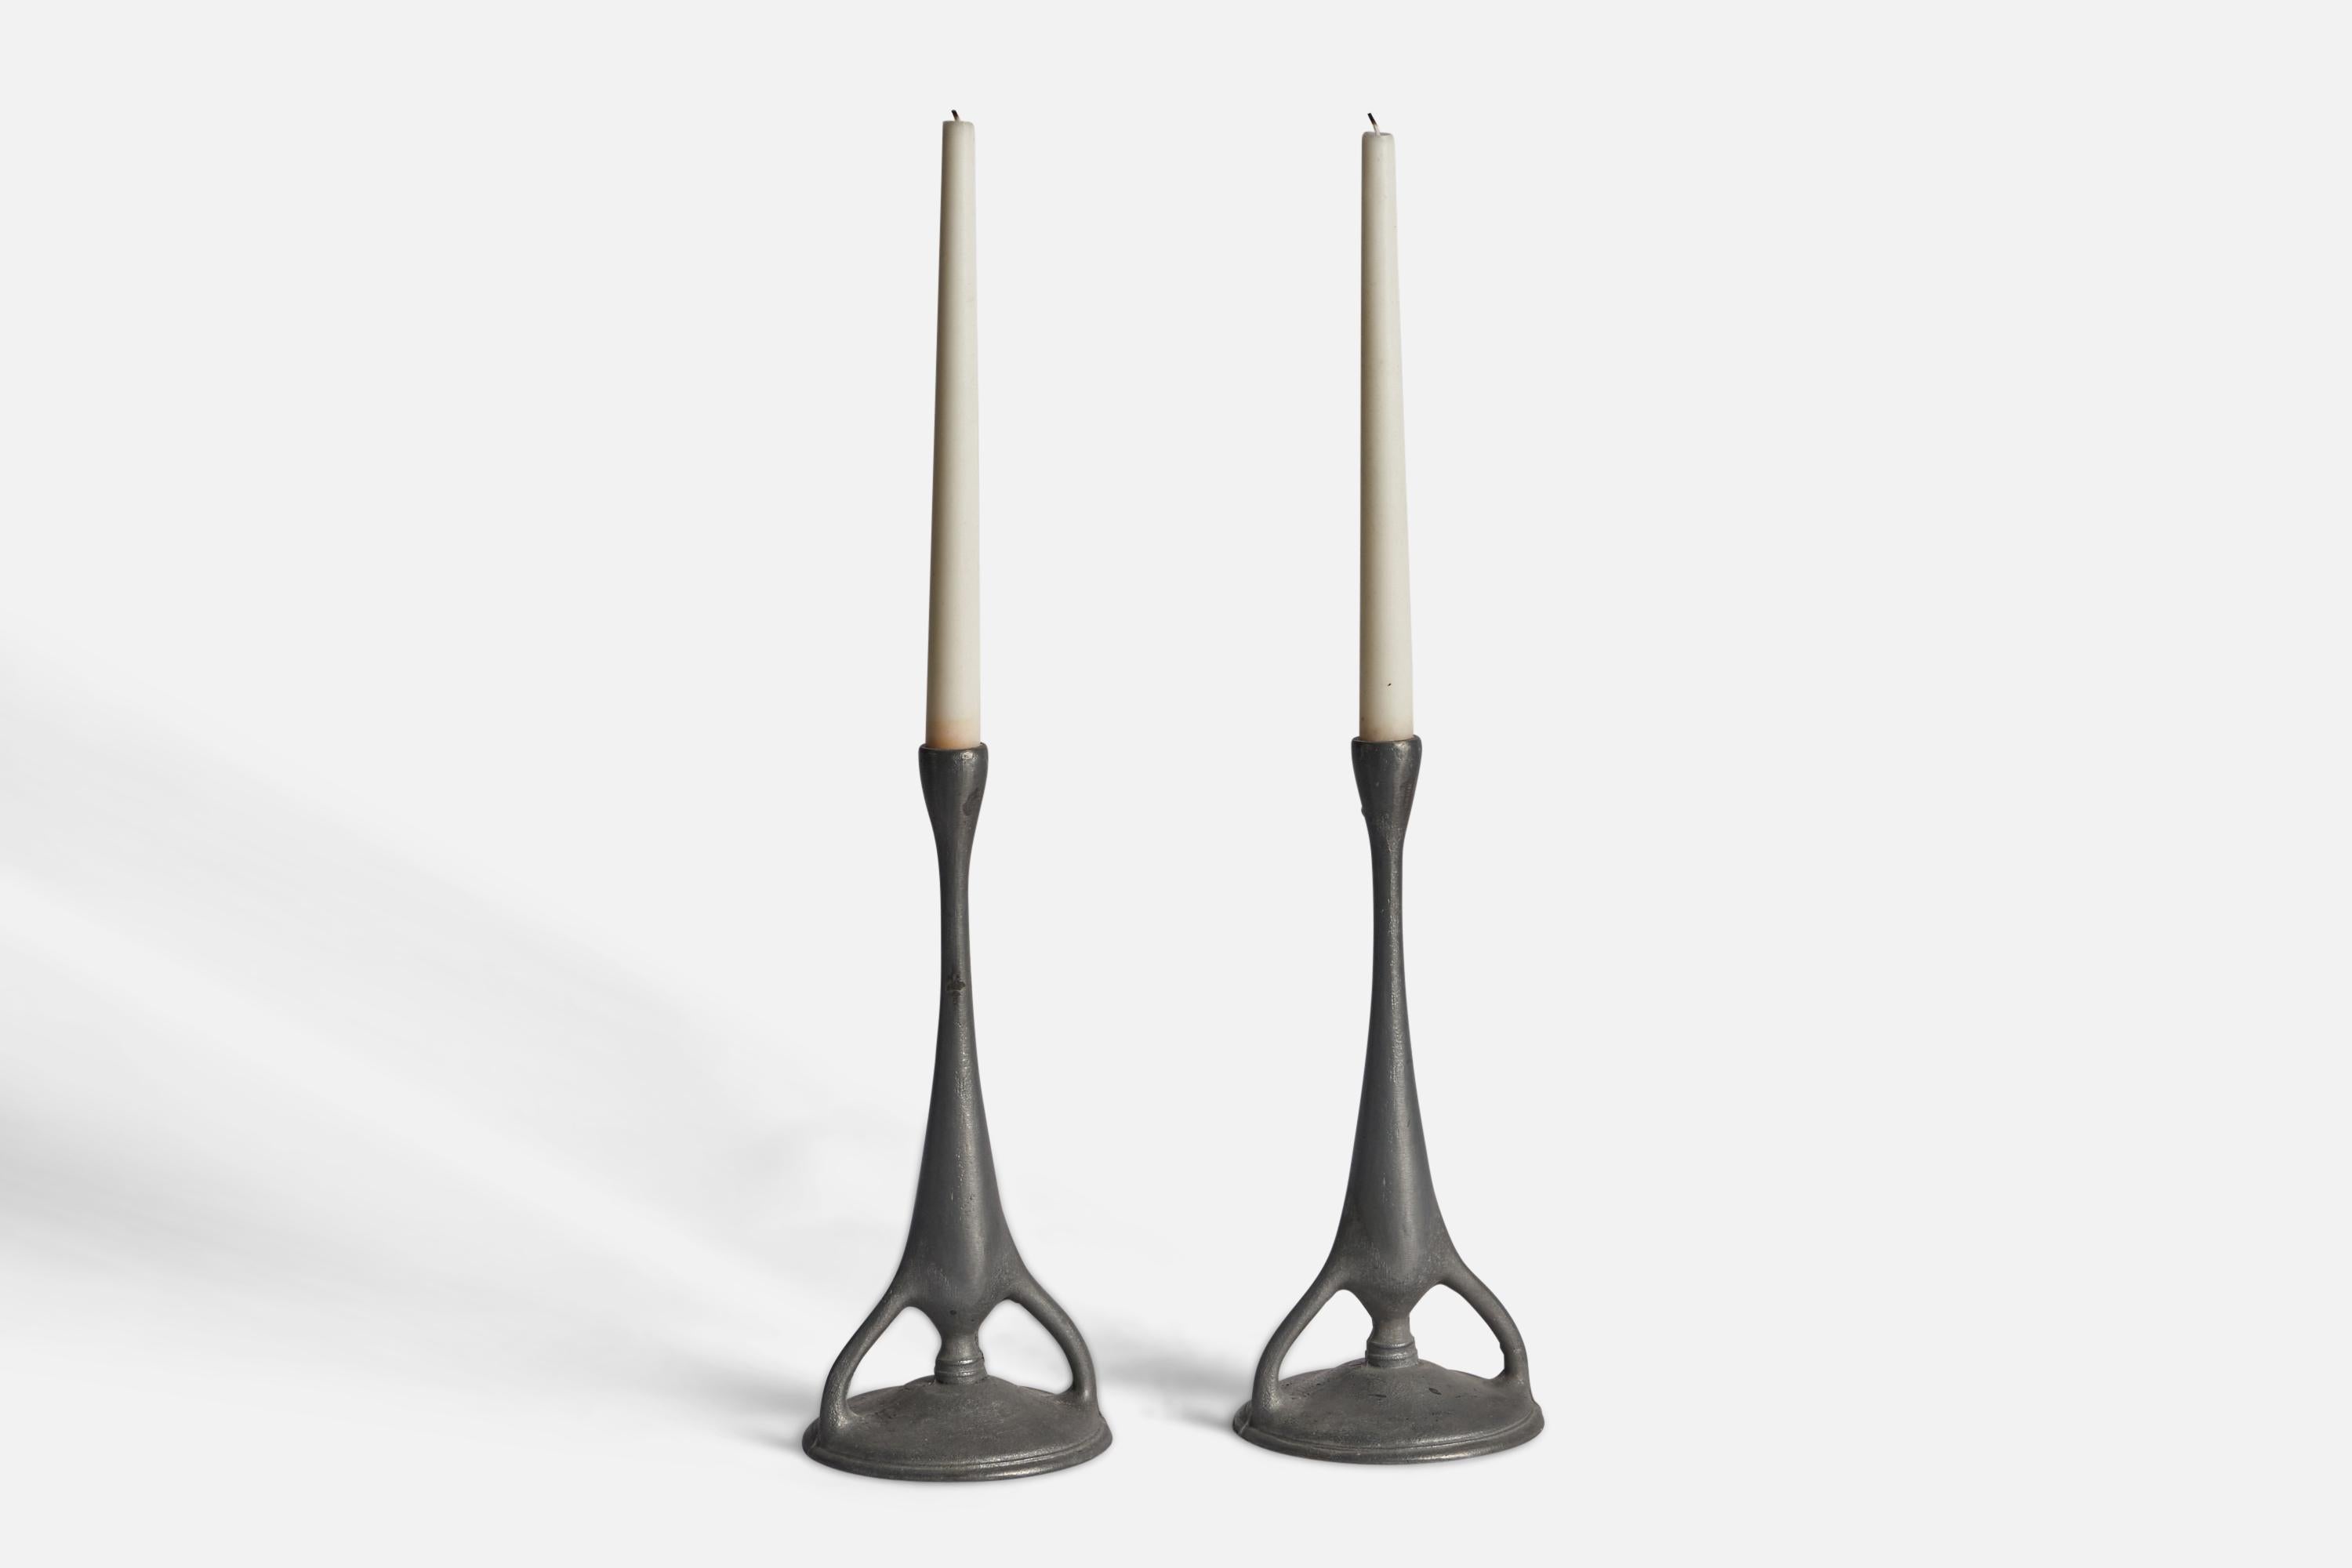 A pair of pewter candlesticks designed and produced in Sweden, 1930s.

Holds 0.65” diameter candles